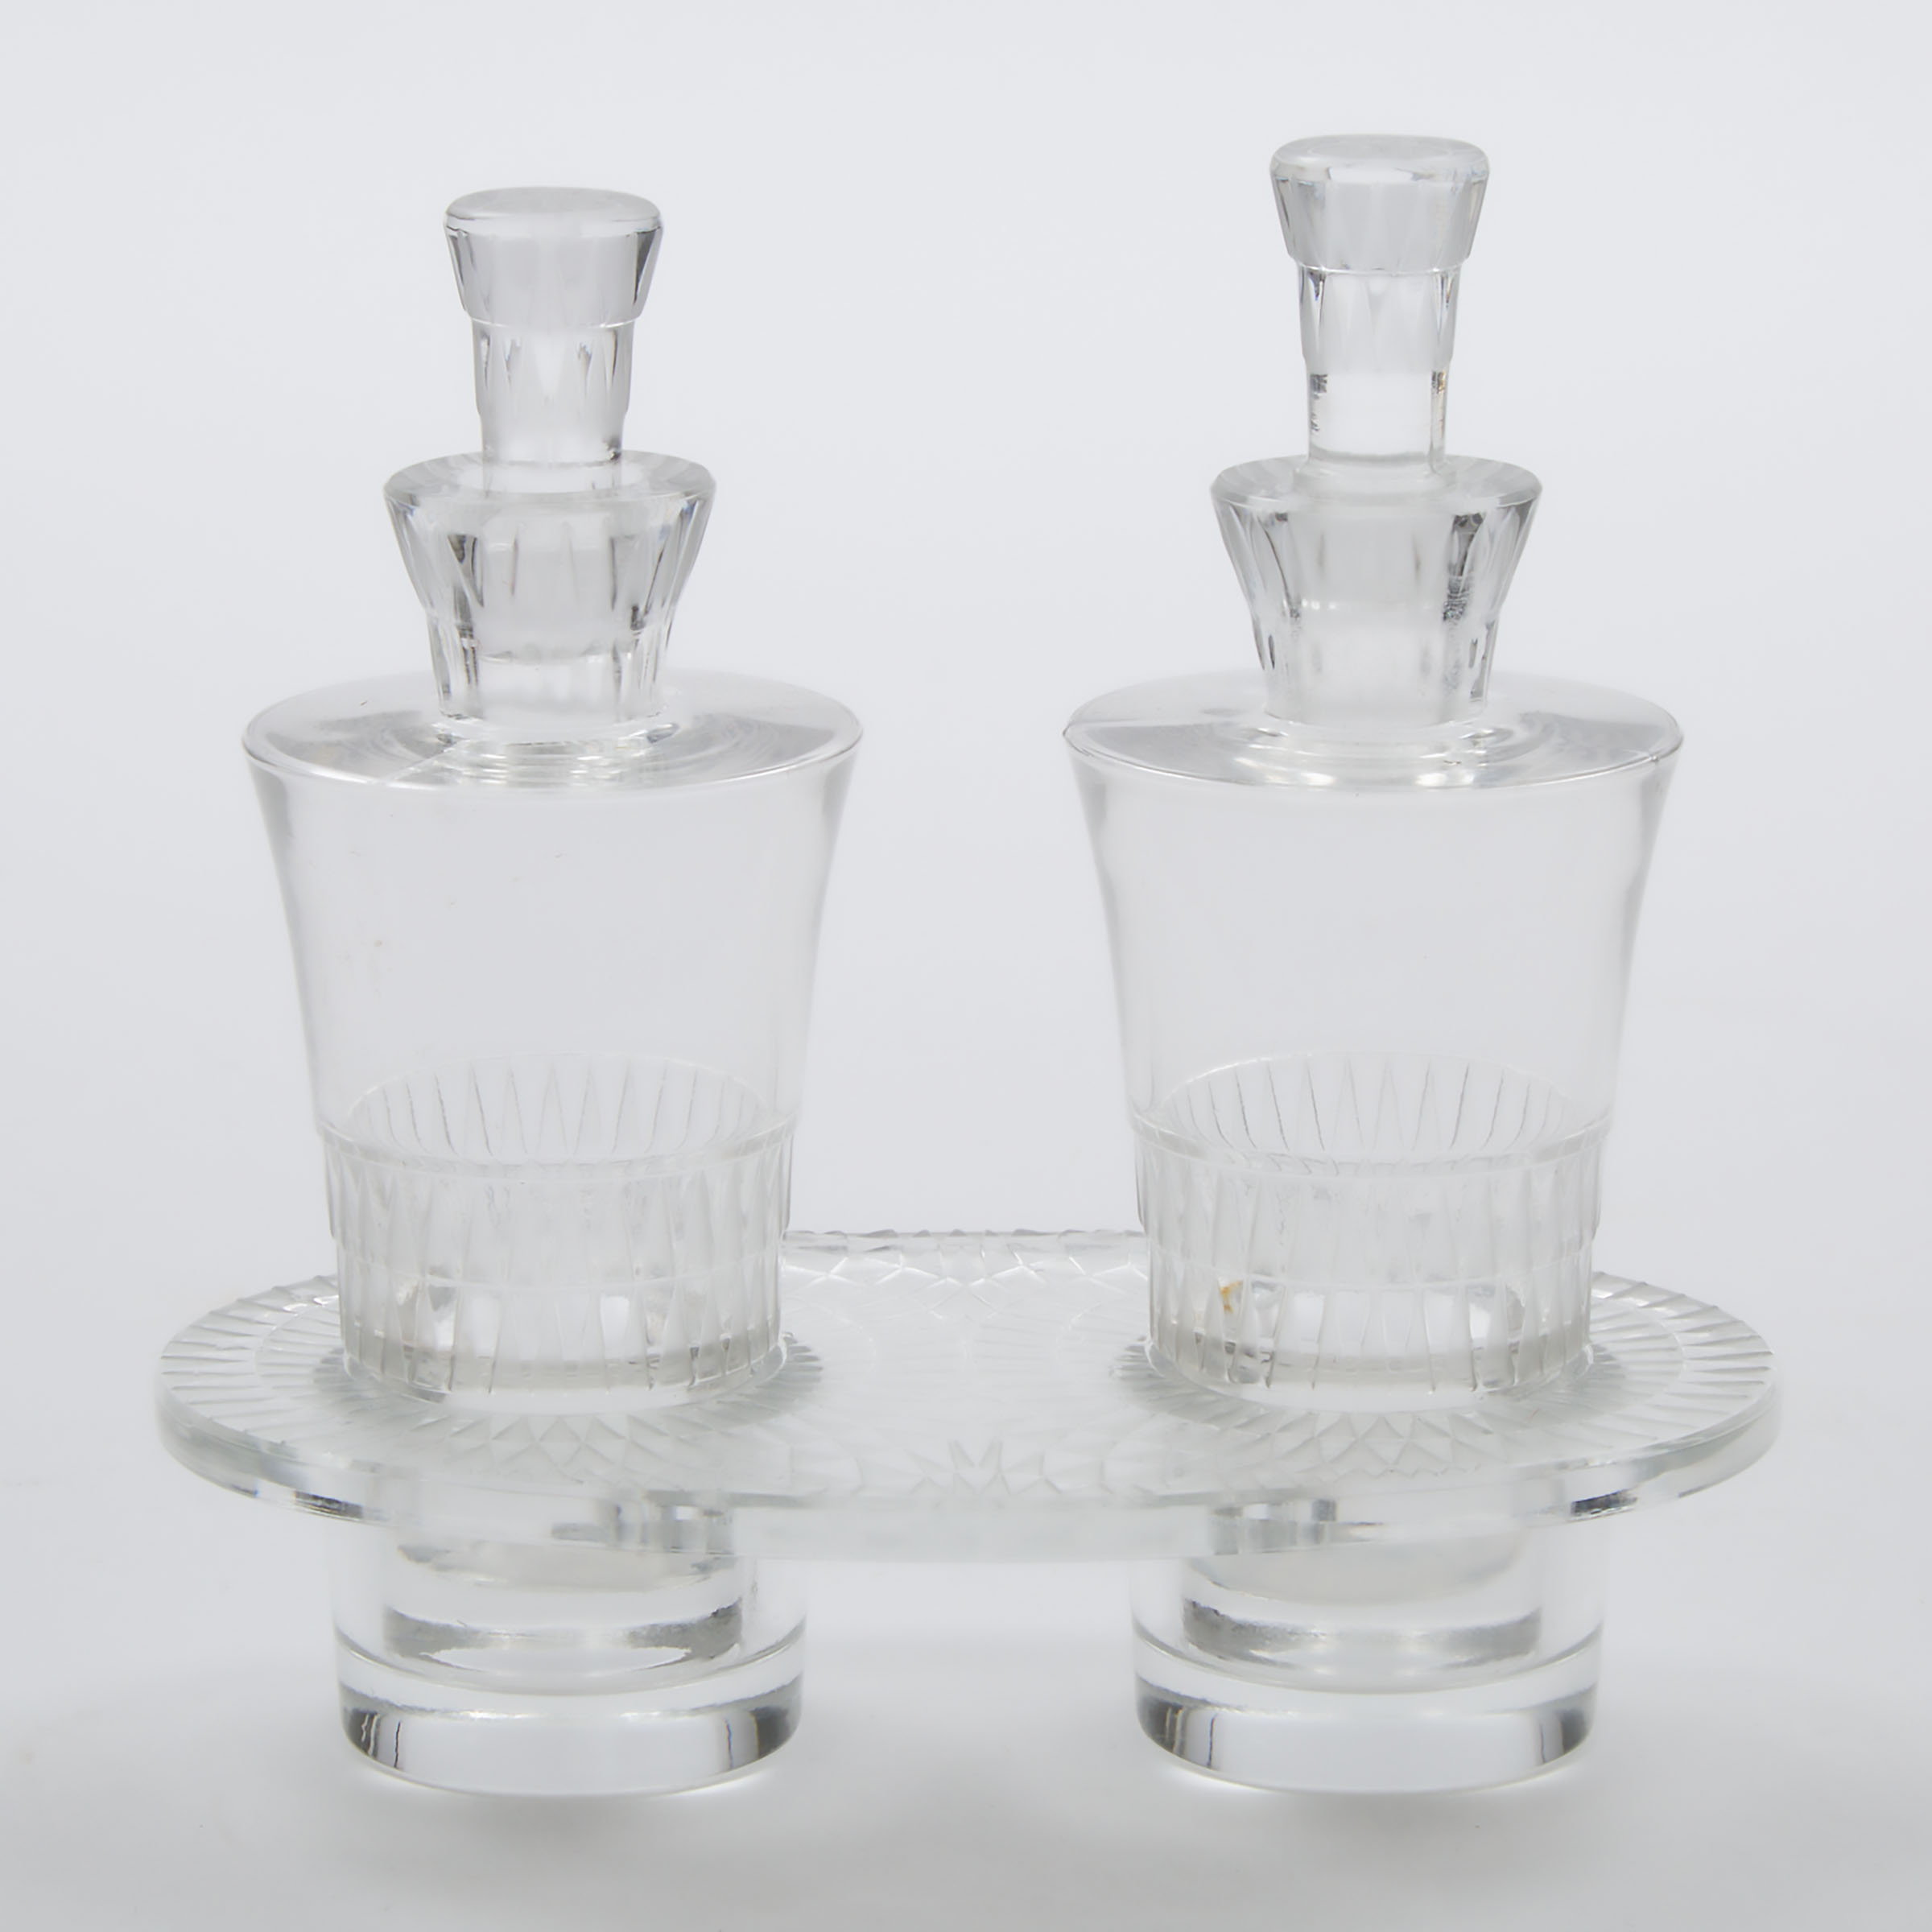 'Bourgueil', Lalique Moulded and Partly Frosted Glass Oil and Vinegar Cruet, post-1945